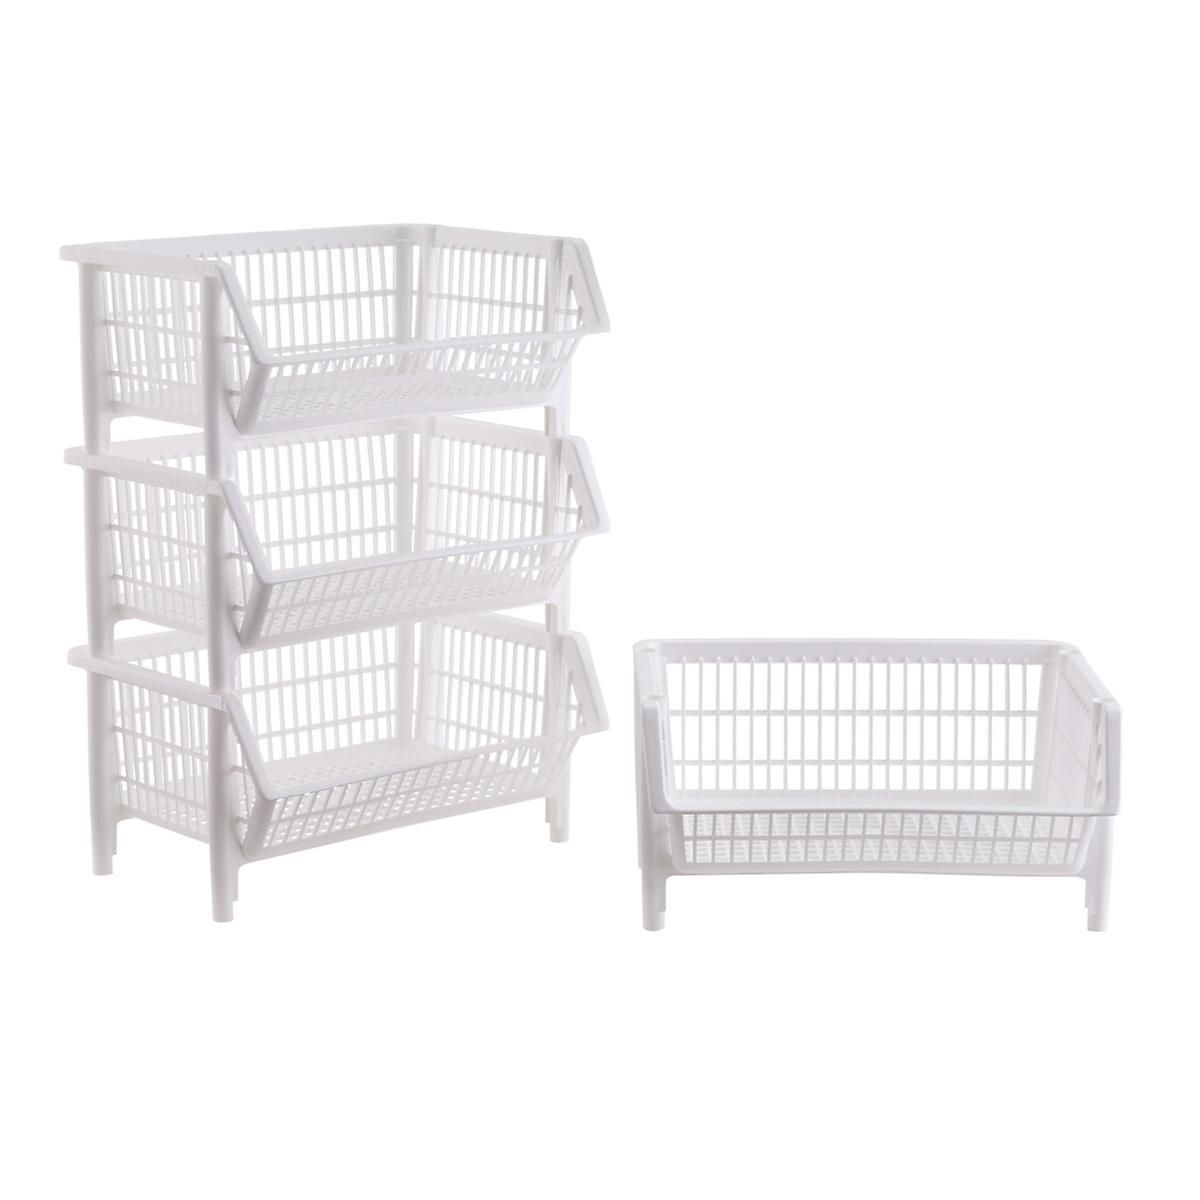 Case of 4 Our Basic Stack Baskets White | The Container Store